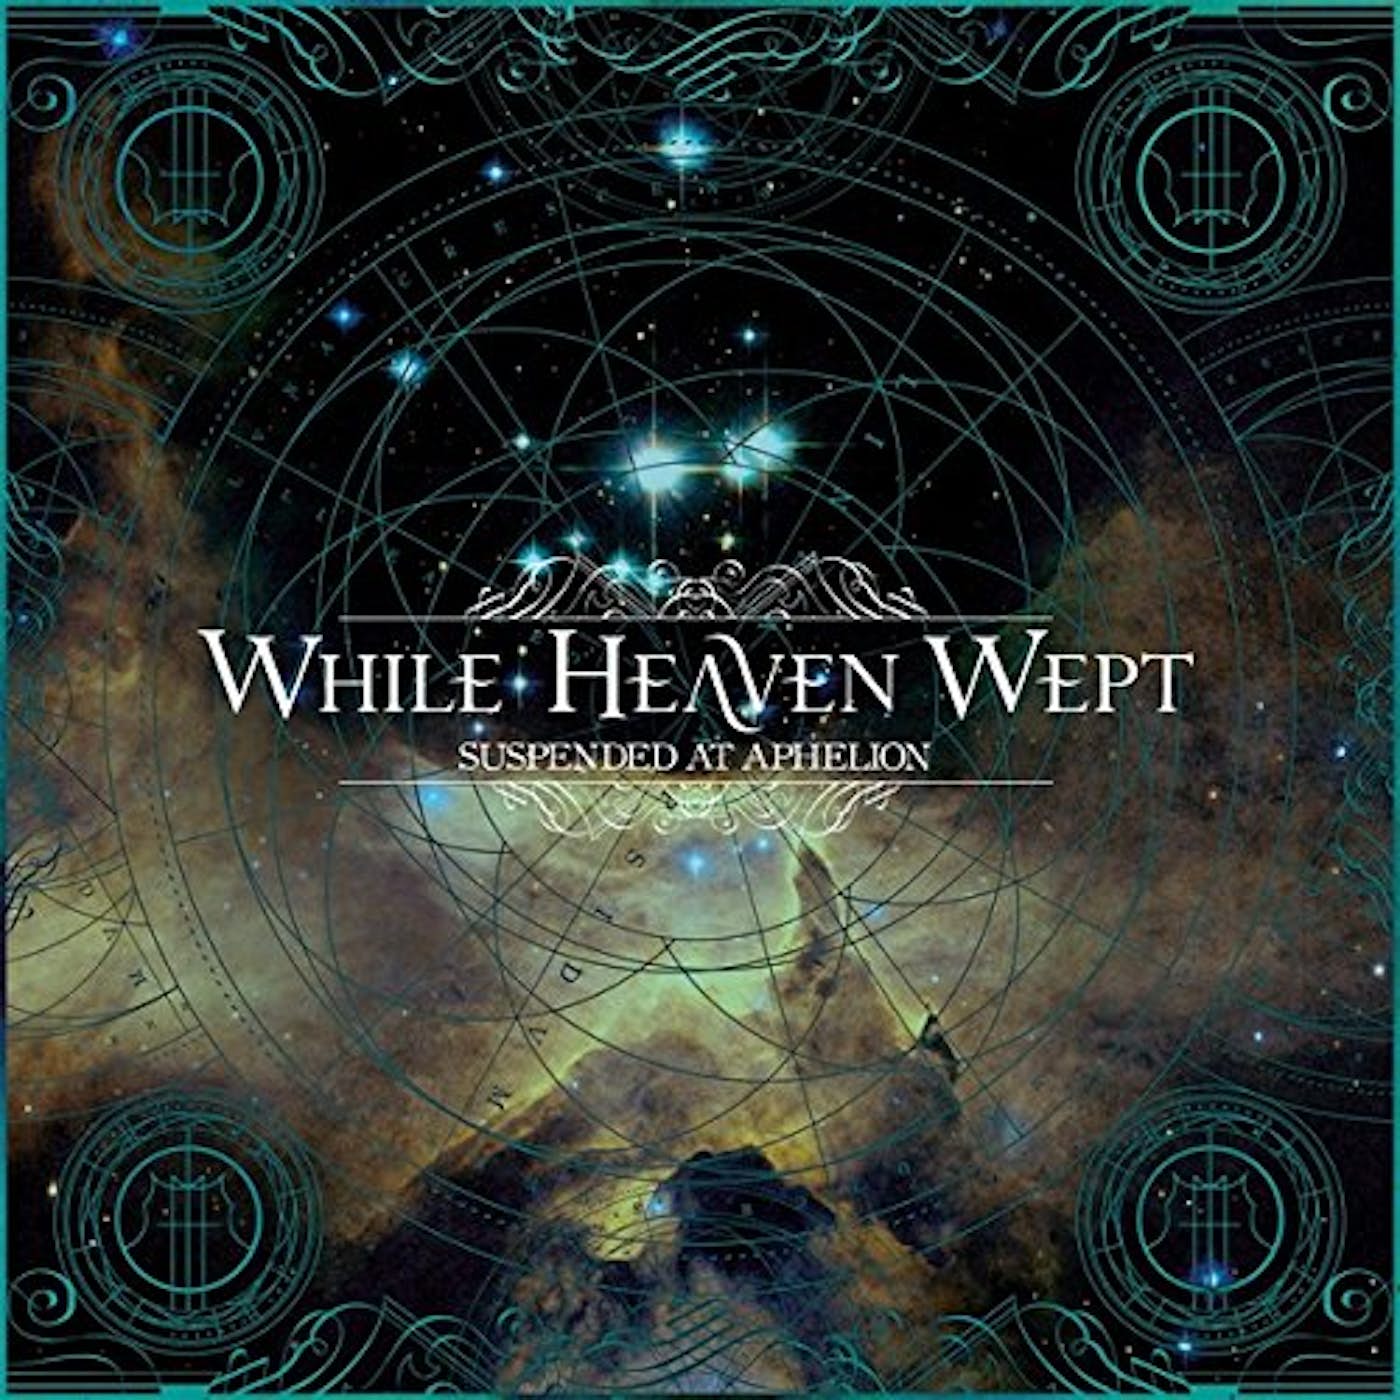 While Heaven Wept Suspended At Aphelion Vinyl Record